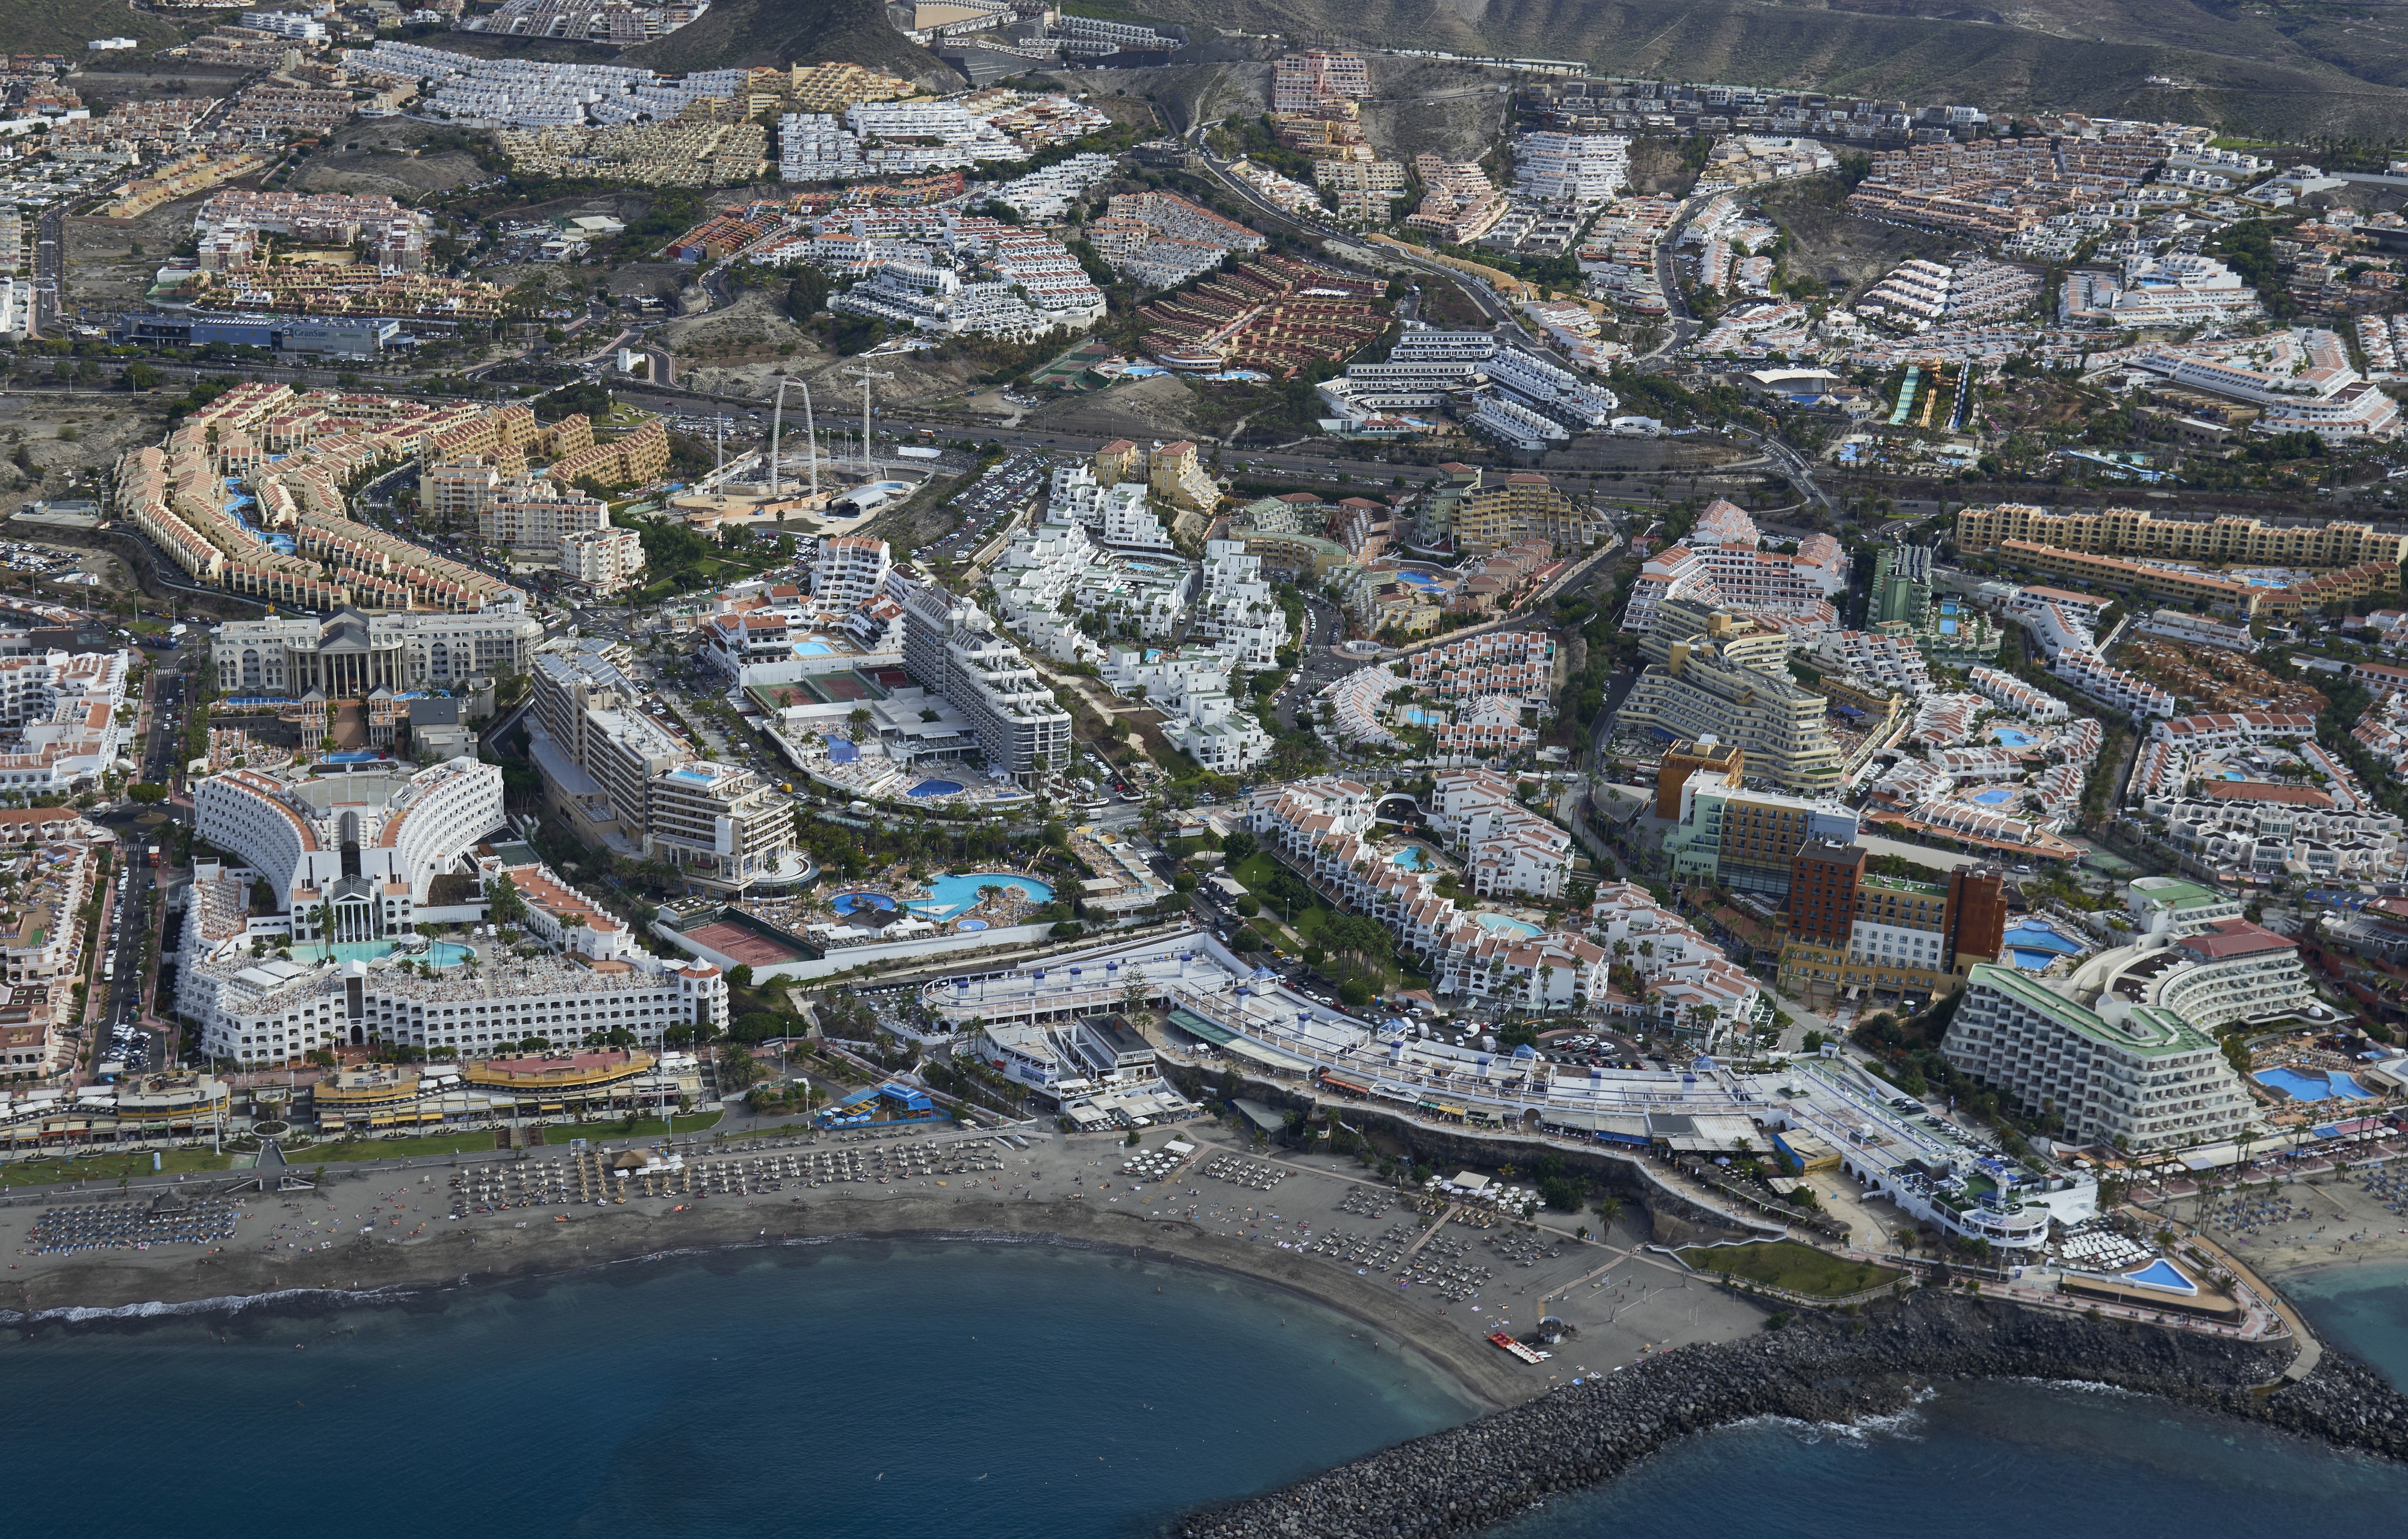 A0426 Tenerife, Hotels in Adeje aerial view